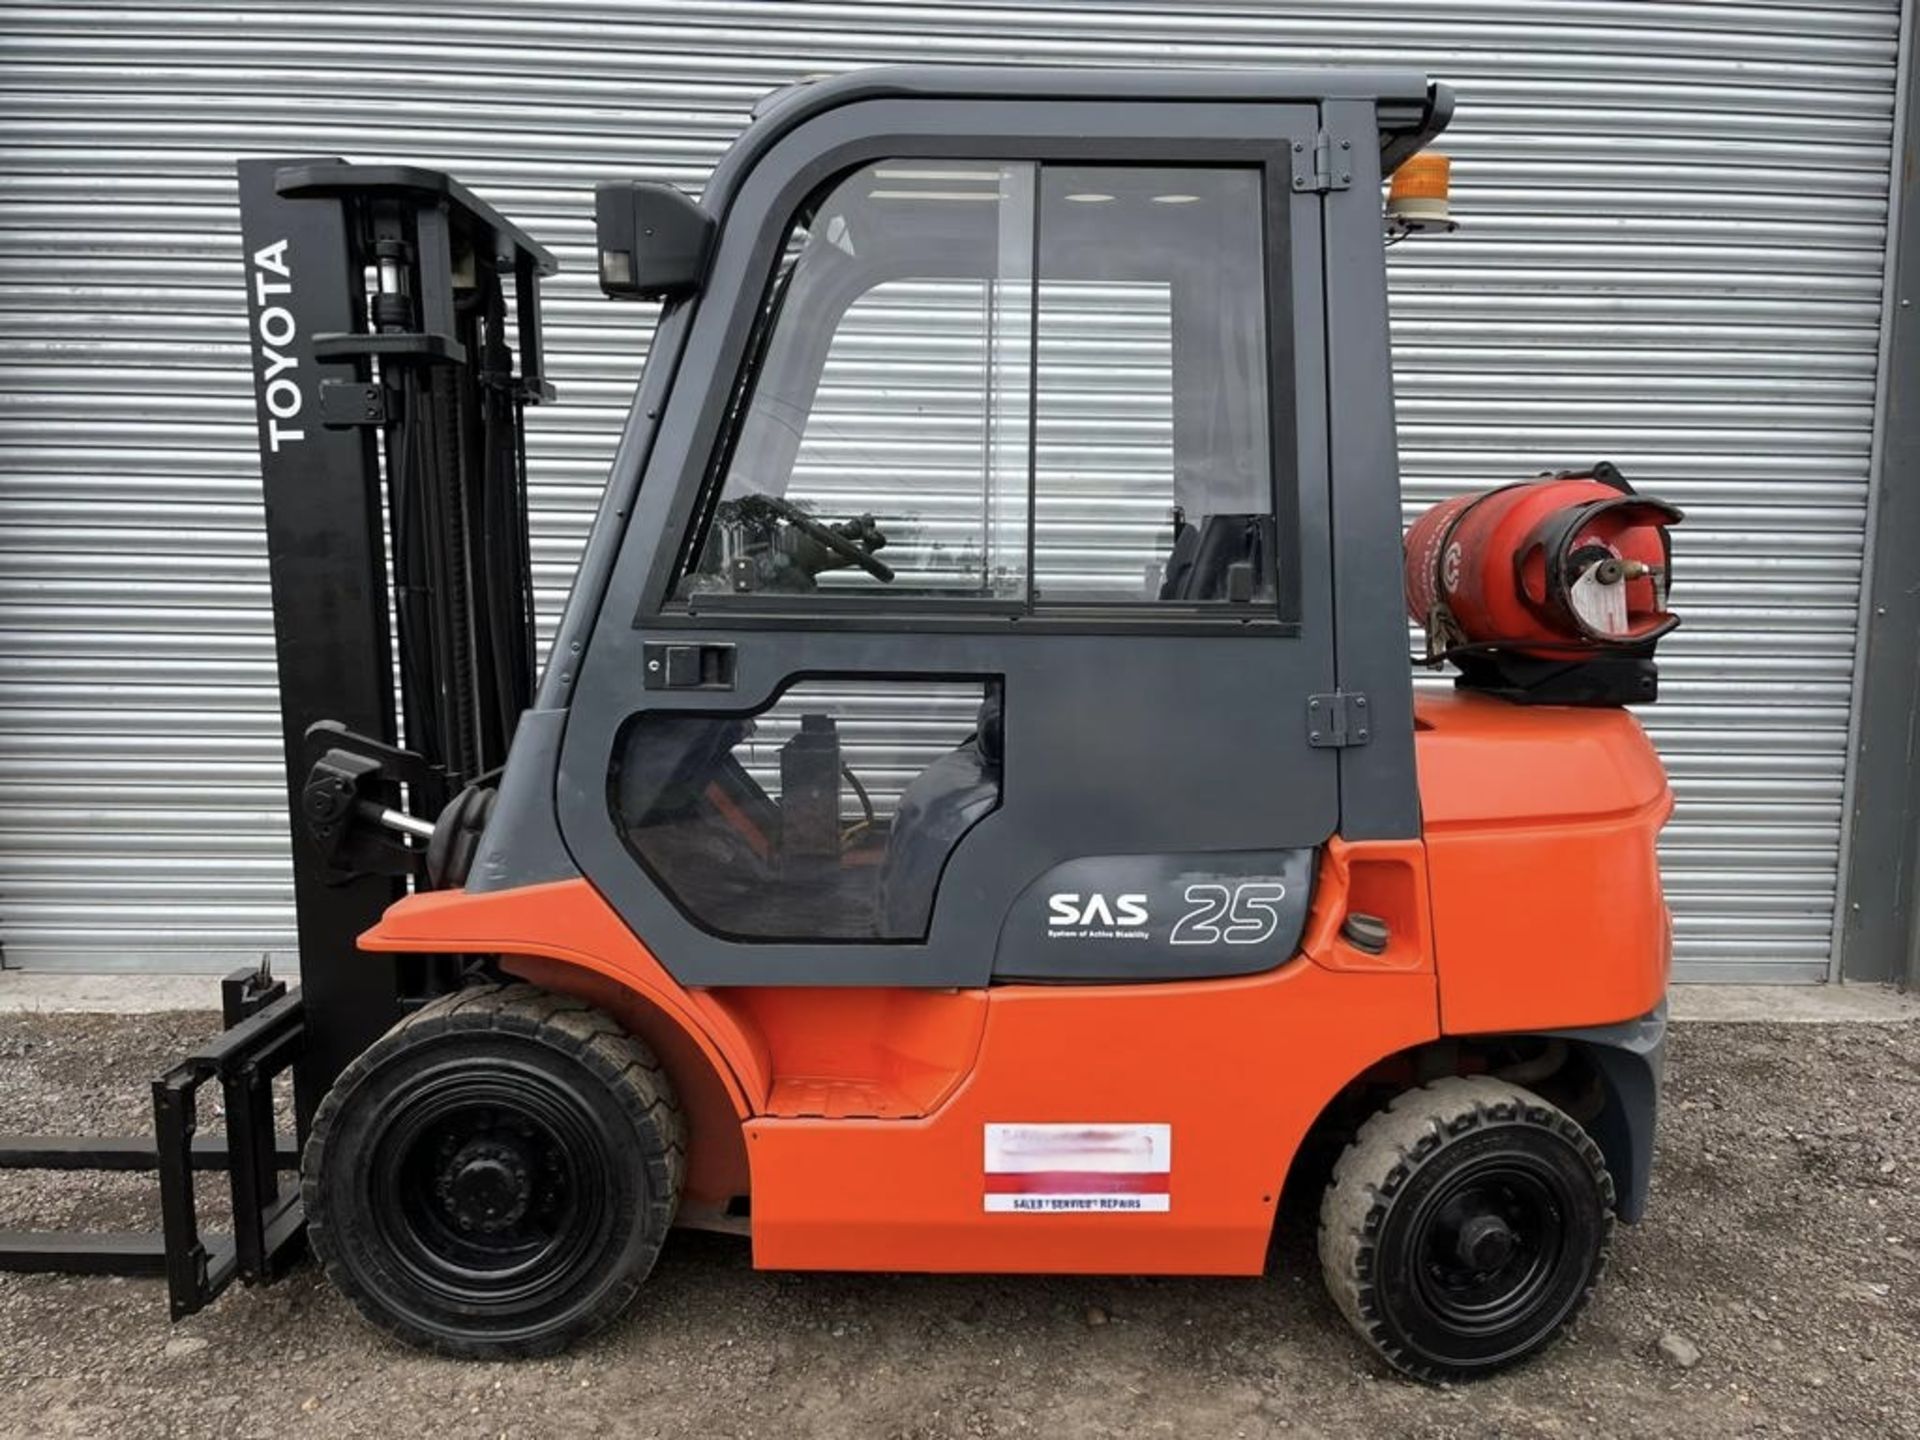 TOYOTA, 2.5 Tonne - Gas Forklift Truck - Image 8 of 11